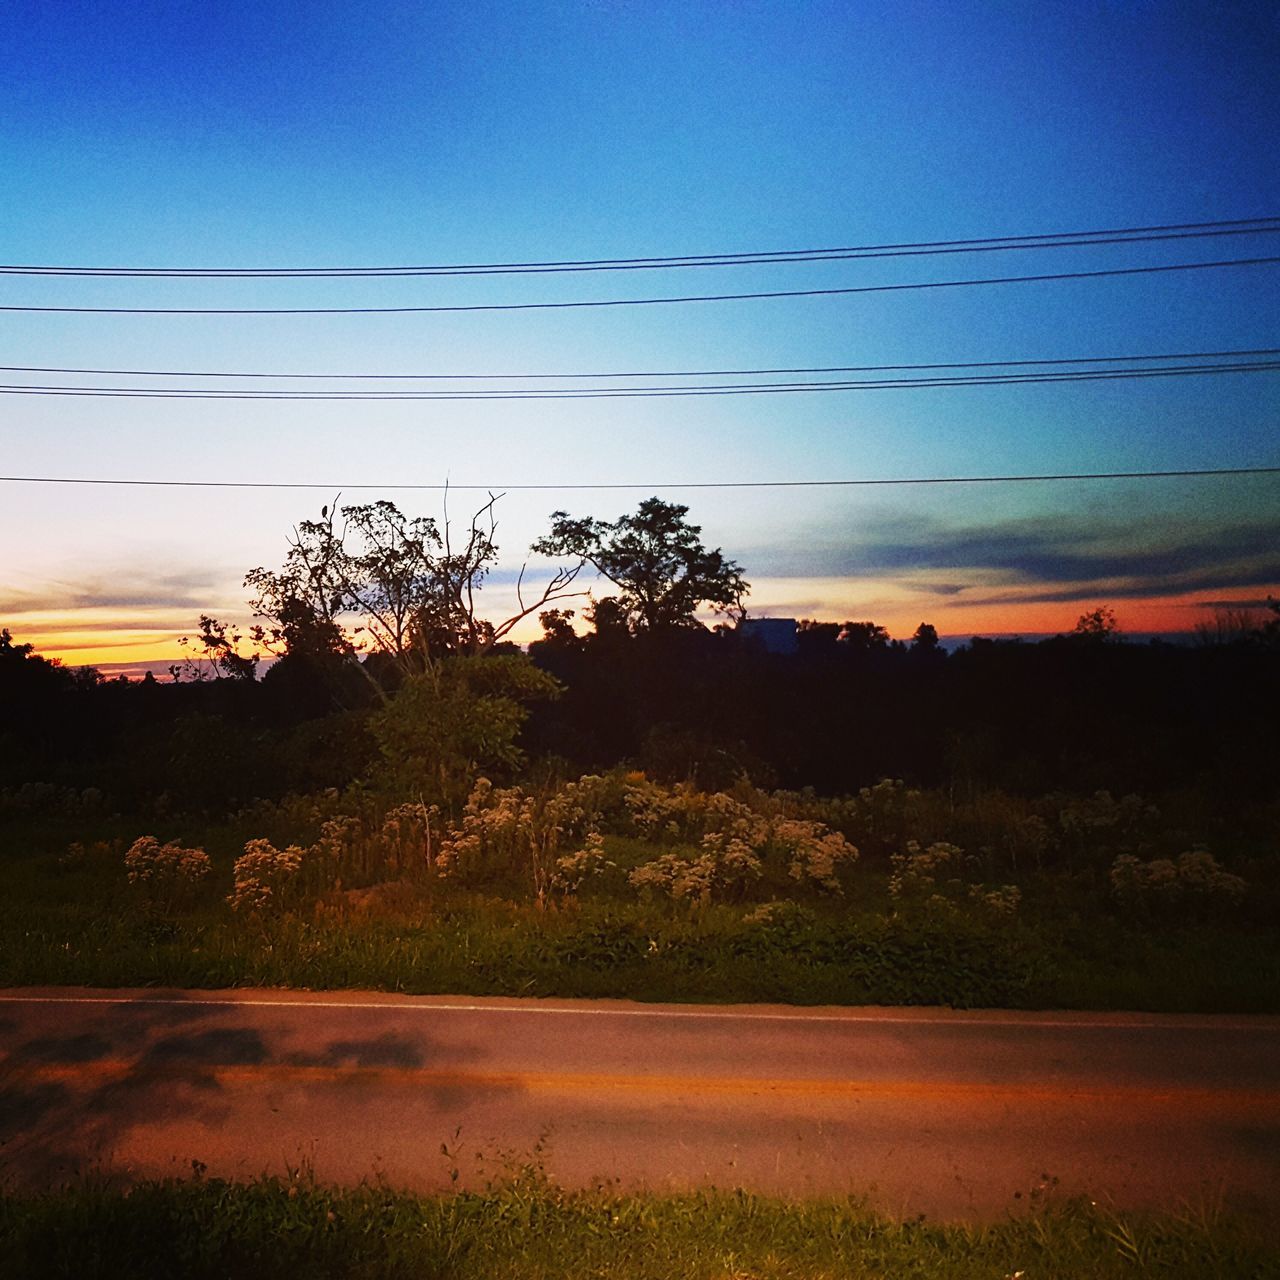 sunset, road, cable, tree, street, power line, blue, electricity, power cable, tranquil scene, sky, tranquility, electricity pylon, country road, outdoors, scenics, nature, solitude, countryside, remote, power supply, cloud - sky, long, beauty in nature